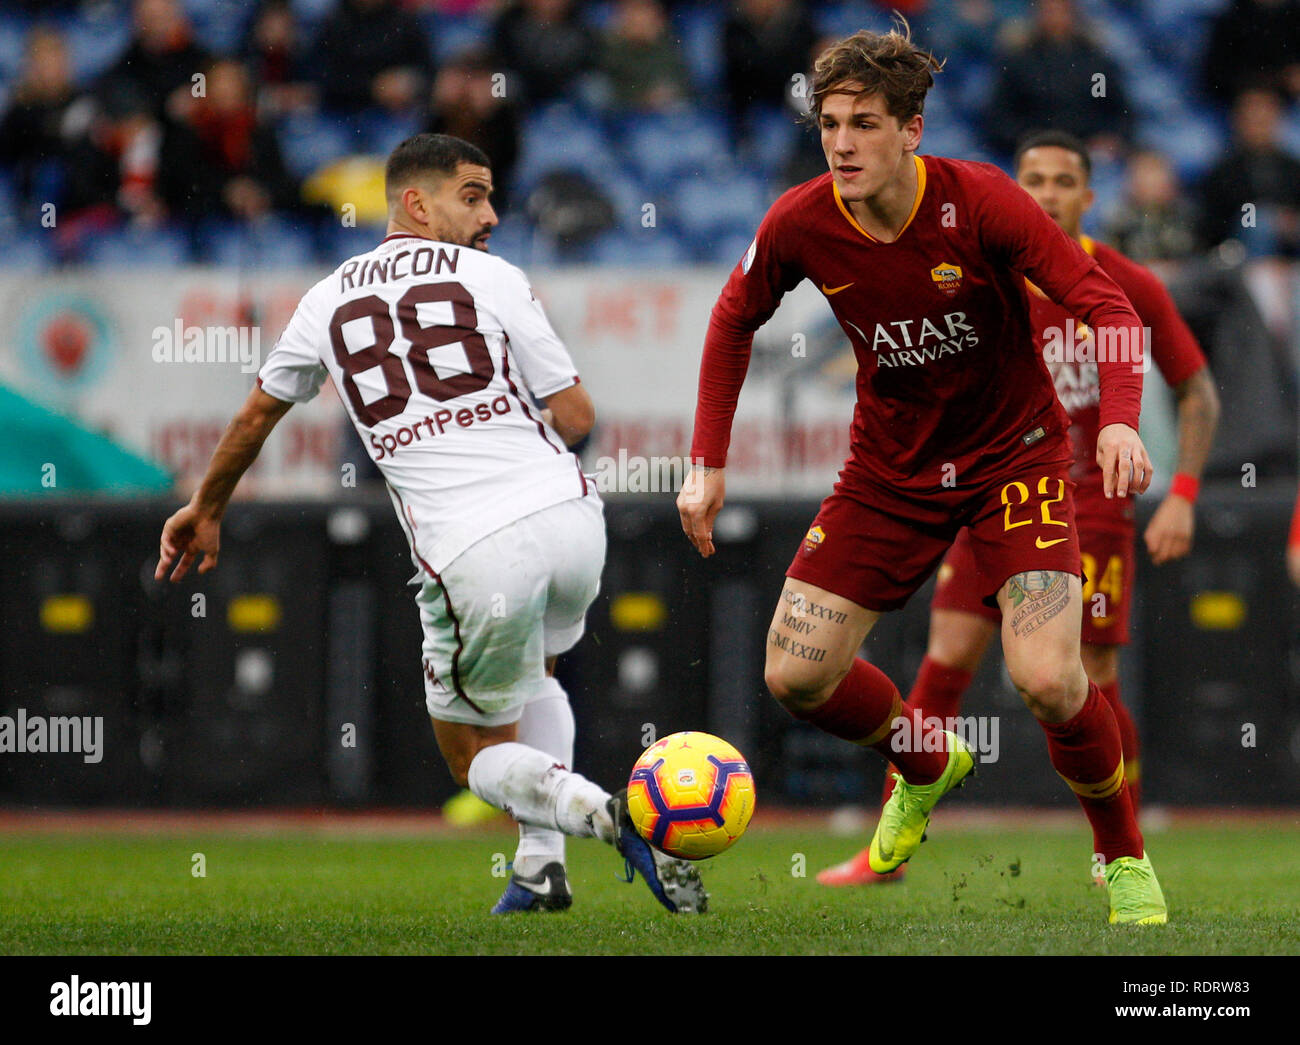 Rome, Italy, 19th January, 2019. Roma's Nicolo' Zaniolo, right, is challenged by Torino's Tomas Rincon during the Serie A soccer match between Roma and Torino at the Olympic Stadium. Roma won 3-2. © Riccardo De Luca UPDATE IMAGES/ Alamy Live News Stock Photo